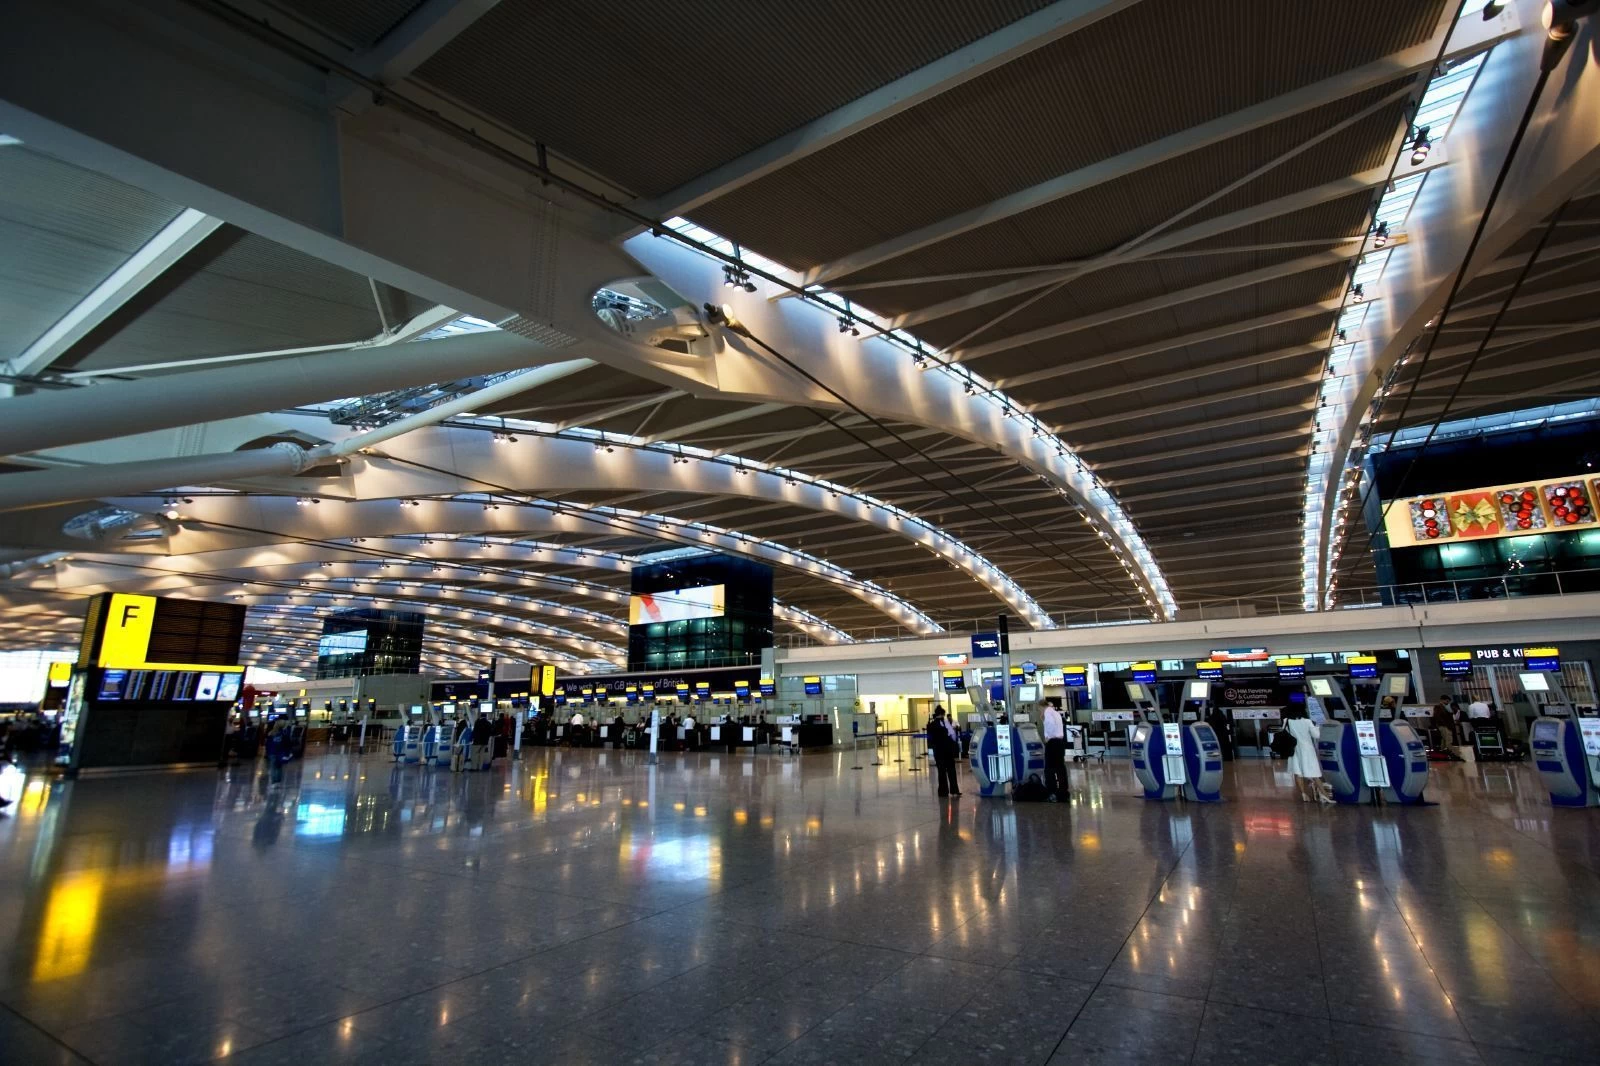 UK dedicates terminal at Heathrow Airport for passengers arriving from red-list countries